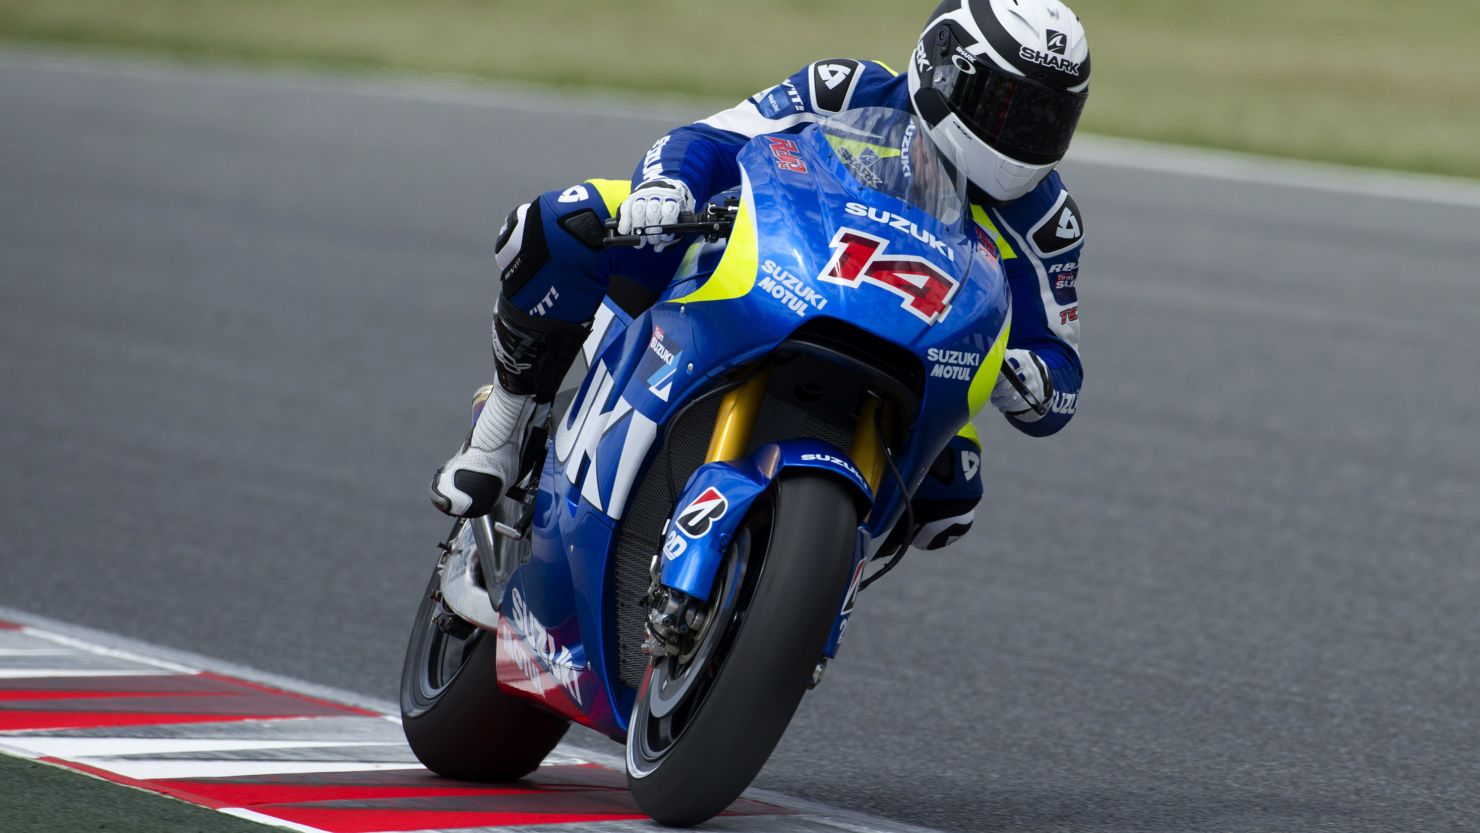 Frenchman Randy de Puniet was one of two riders in the saddle for Suzuki at a test event on Monday.